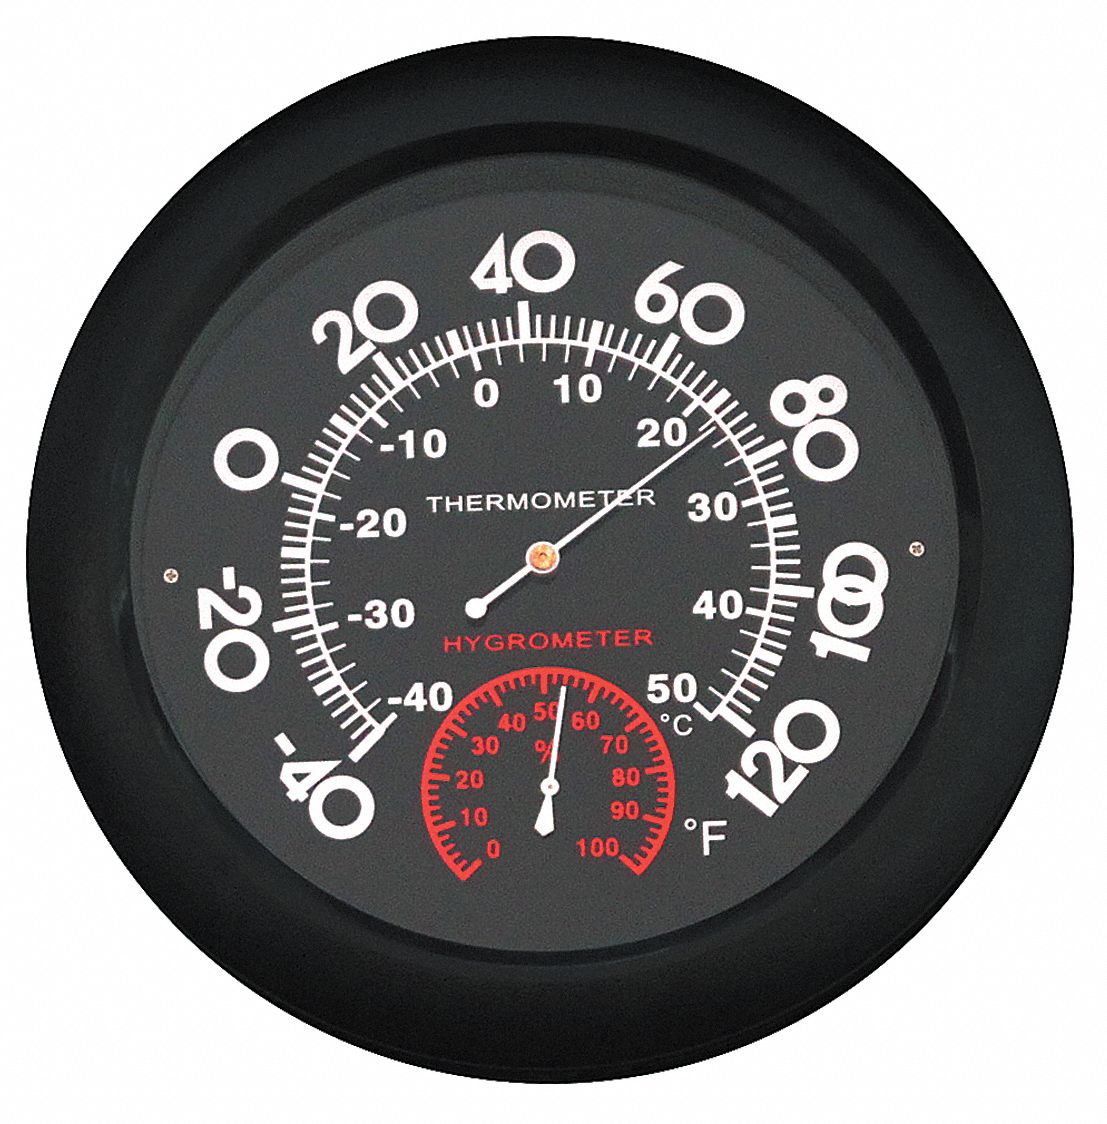 49T437 - Analog Thermometer -40 to 120 Degree F